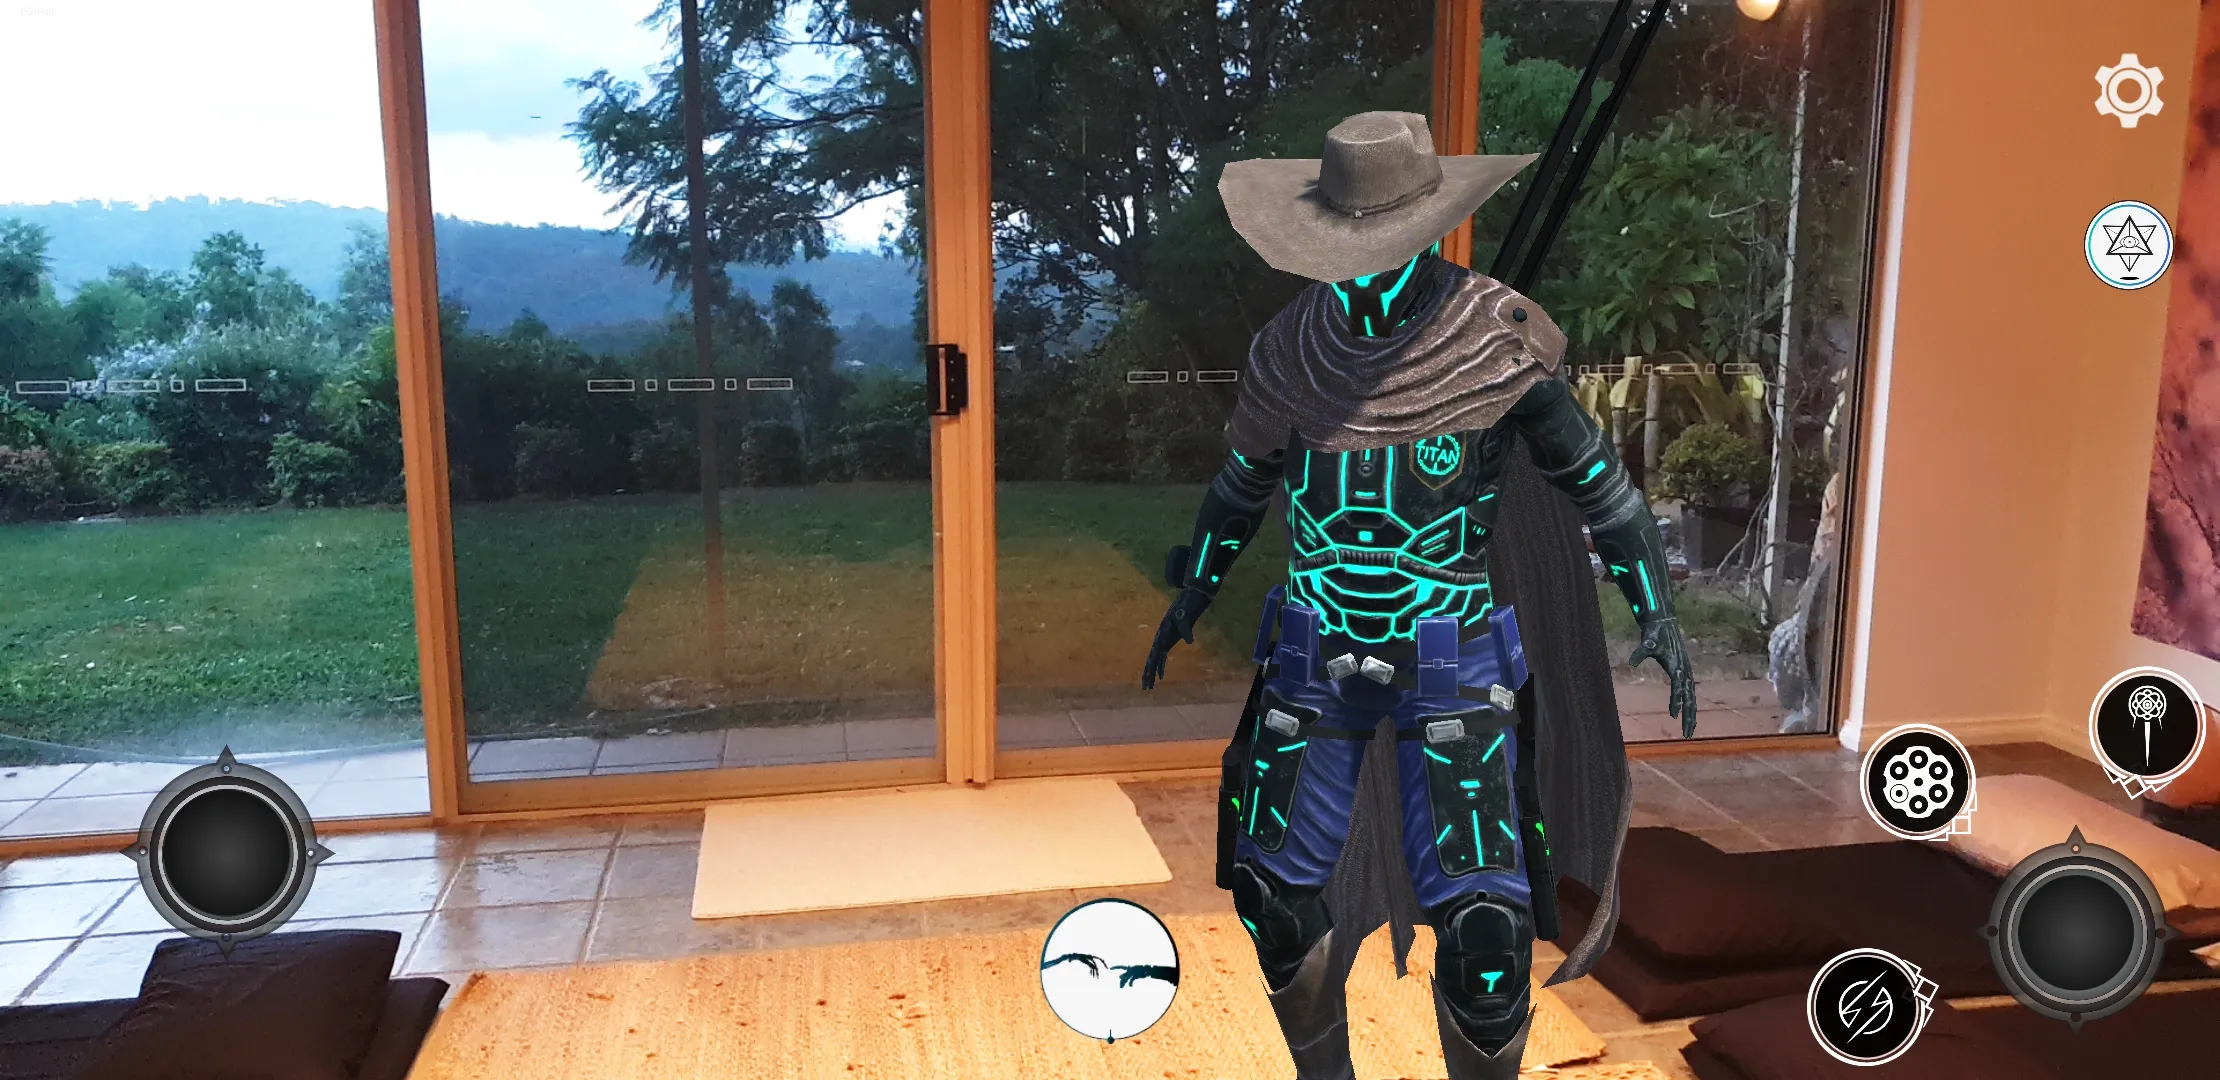 How to Play AR TCG. Robot cowboy standing in a living room.